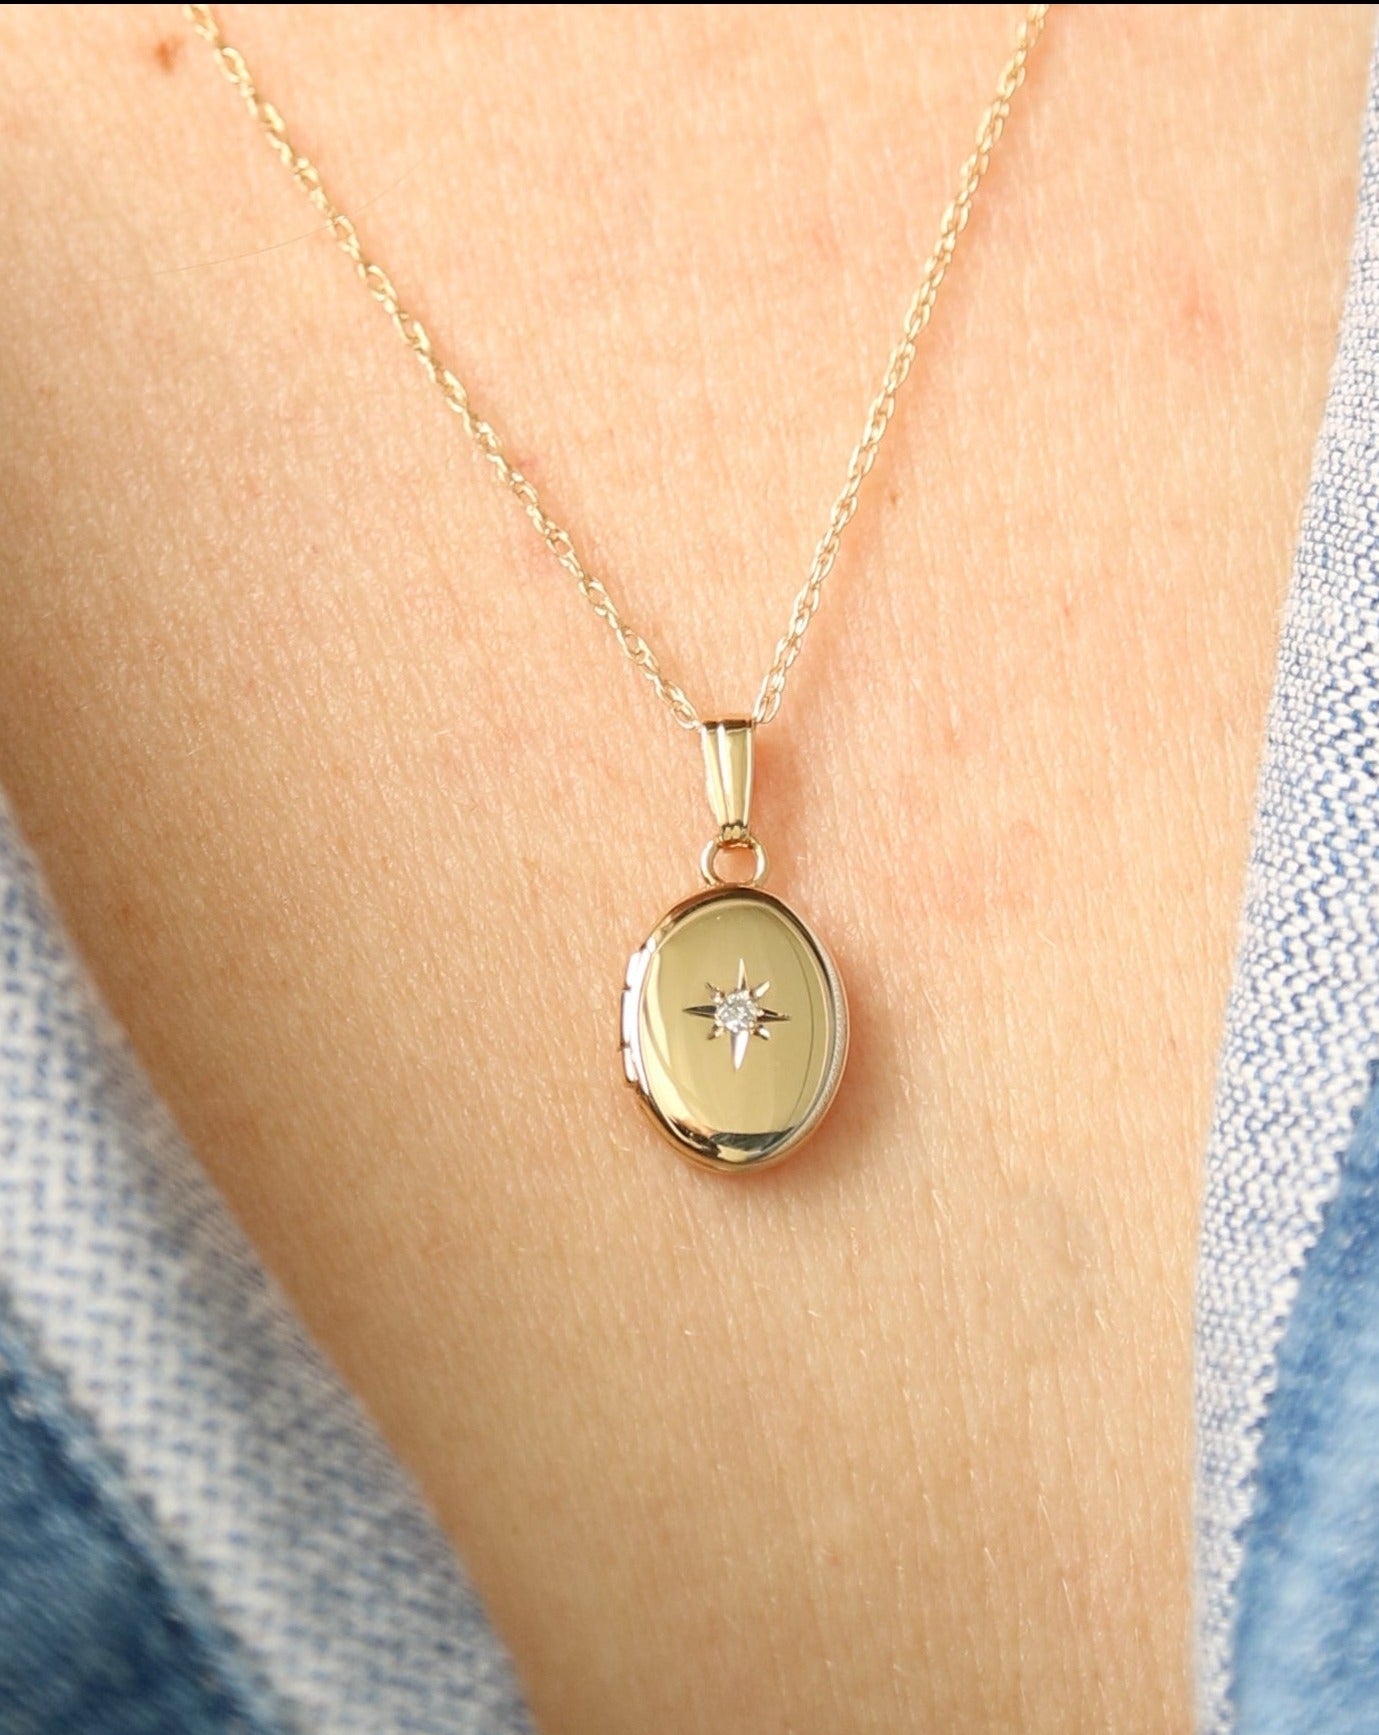 Solid 14ct gold locket from La Kaiser Jewellery